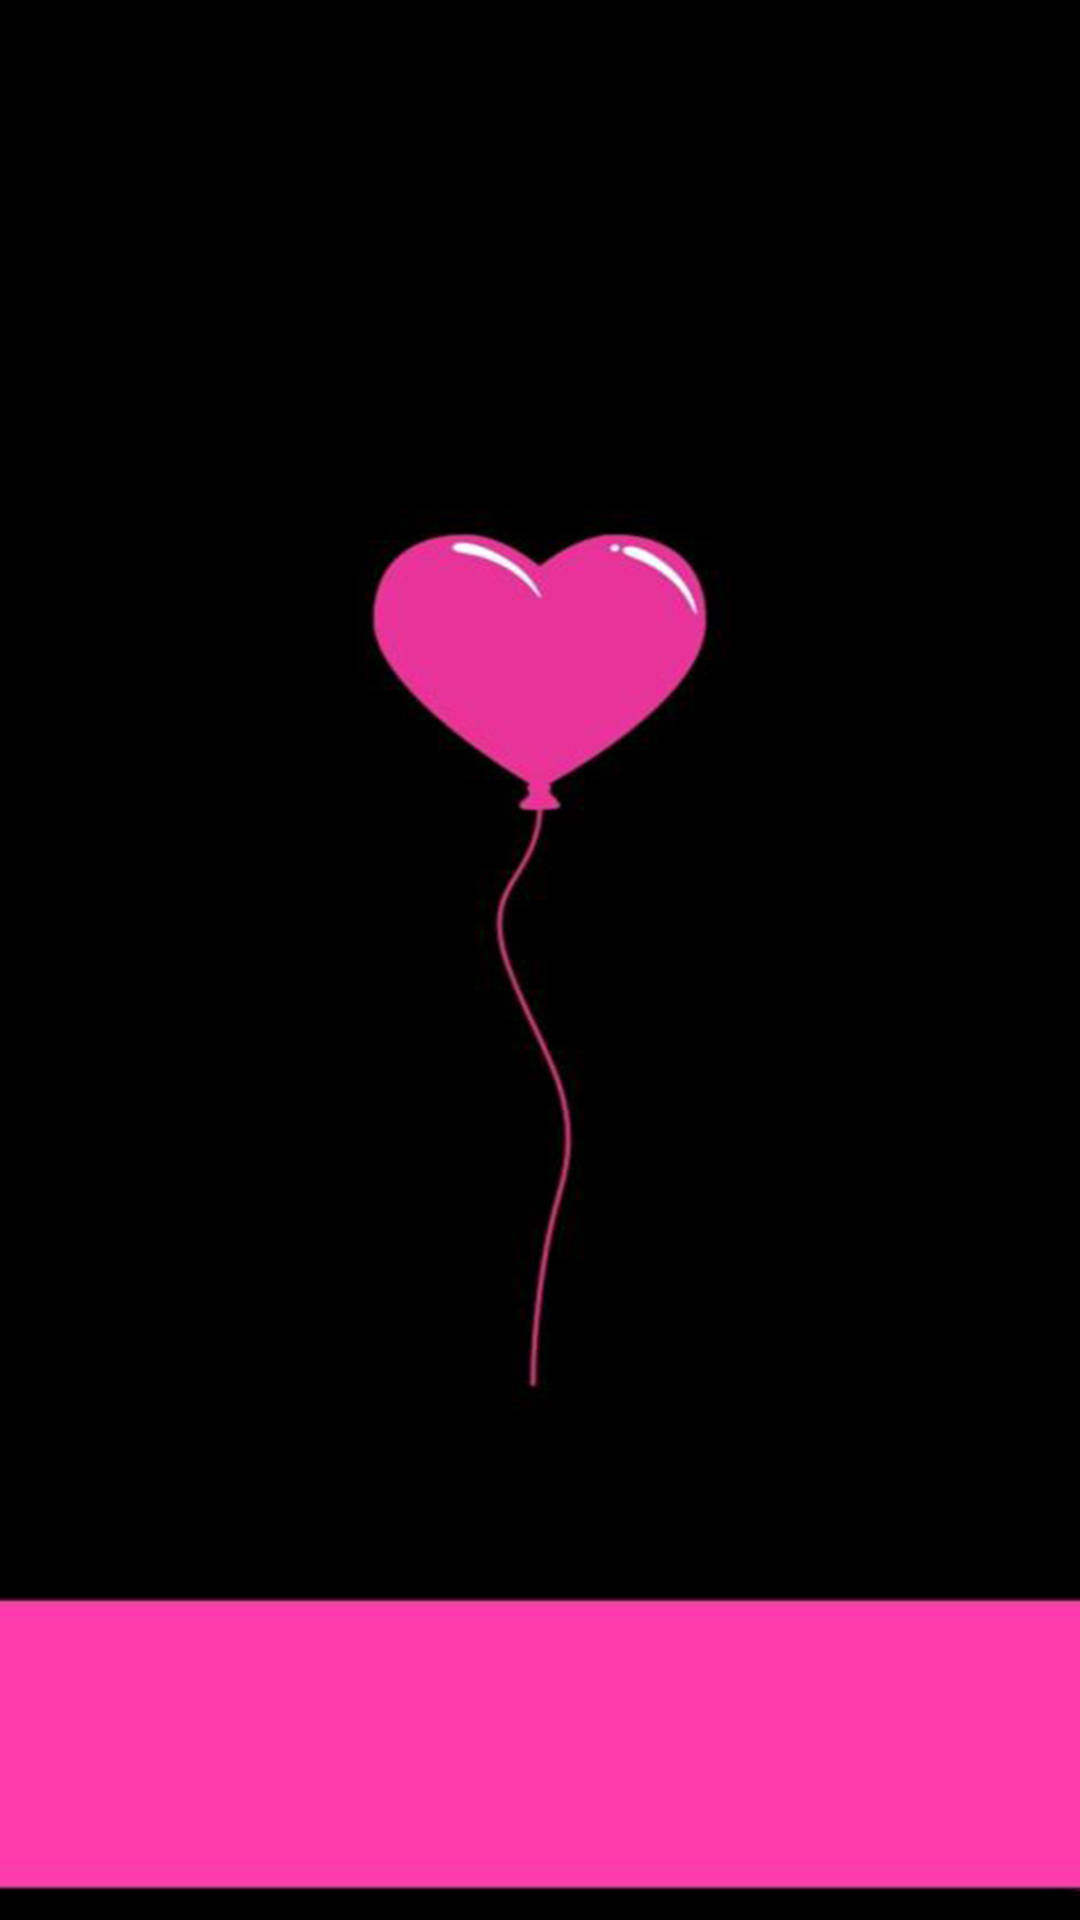 Black And Pink Aesthetic Heart Balloon Wallpaper